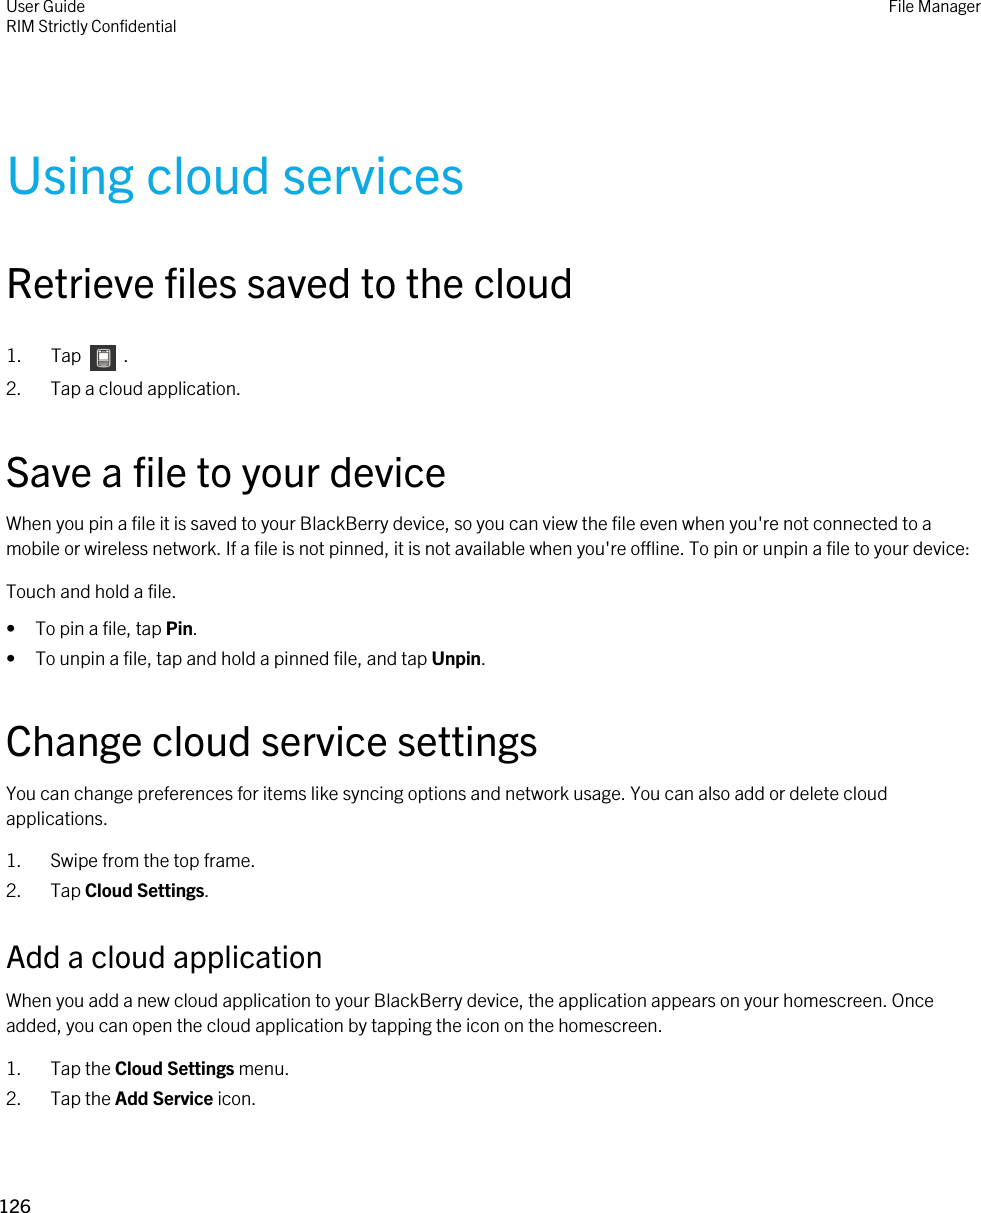 Using cloud servicesRetrieve files saved to the cloud1.  Tap    .2. Tap a cloud application.Save a file to your deviceWhen you pin a file it is saved to your BlackBerry device, so you can view the file even when you&apos;re not connected to a mobile or wireless network. If a file is not pinned, it is not available when you&apos;re offline. To pin or unpin a file to your device:Touch and hold a file.• To pin a file, tap Pin.• To unpin a file, tap and hold a pinned file, and tap Unpin.Change cloud service settingsYou can change preferences for items like syncing options and network usage. You can also add or delete cloud applications.1. Swipe from the top frame.2. Tap Cloud Settings.Add a cloud applicationWhen you add a new cloud application to your BlackBerry device, the application appears on your homescreen. Once added, you can open the cloud application by tapping the icon on the homescreen.1. Tap the Cloud Settings menu.2. Tap the Add Service icon.User GuideRIM Strictly ConfidentialFile Manager126 